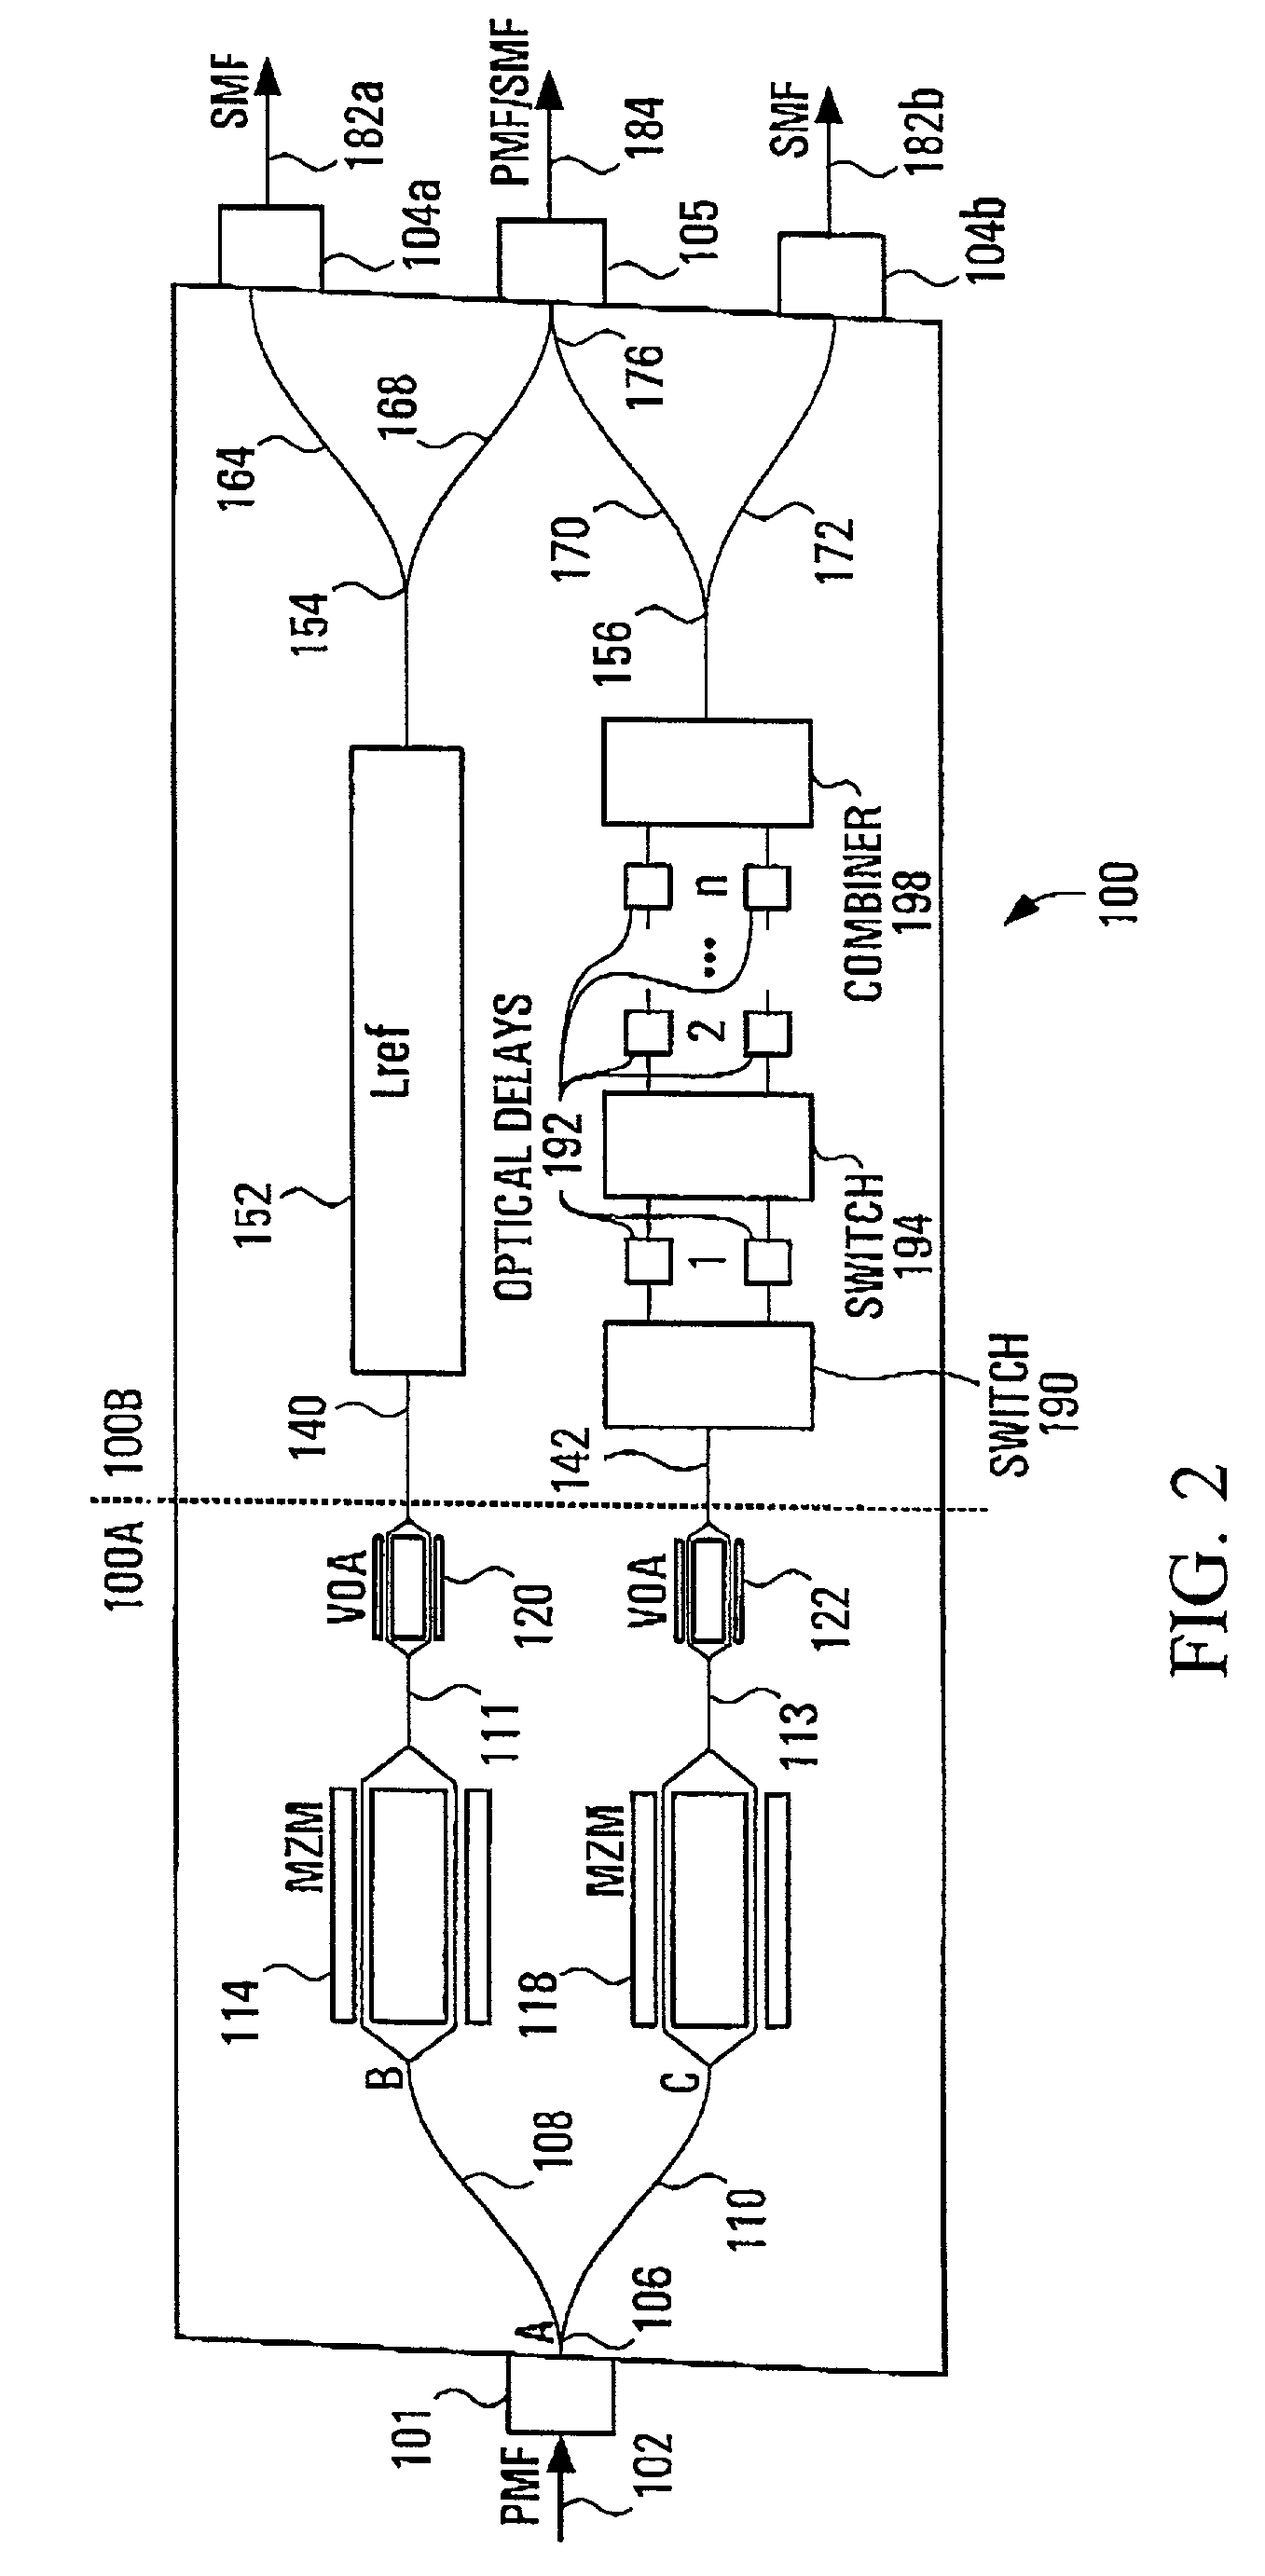 Integrated high-speed multiple-rate optical-time-division-multiplexing module